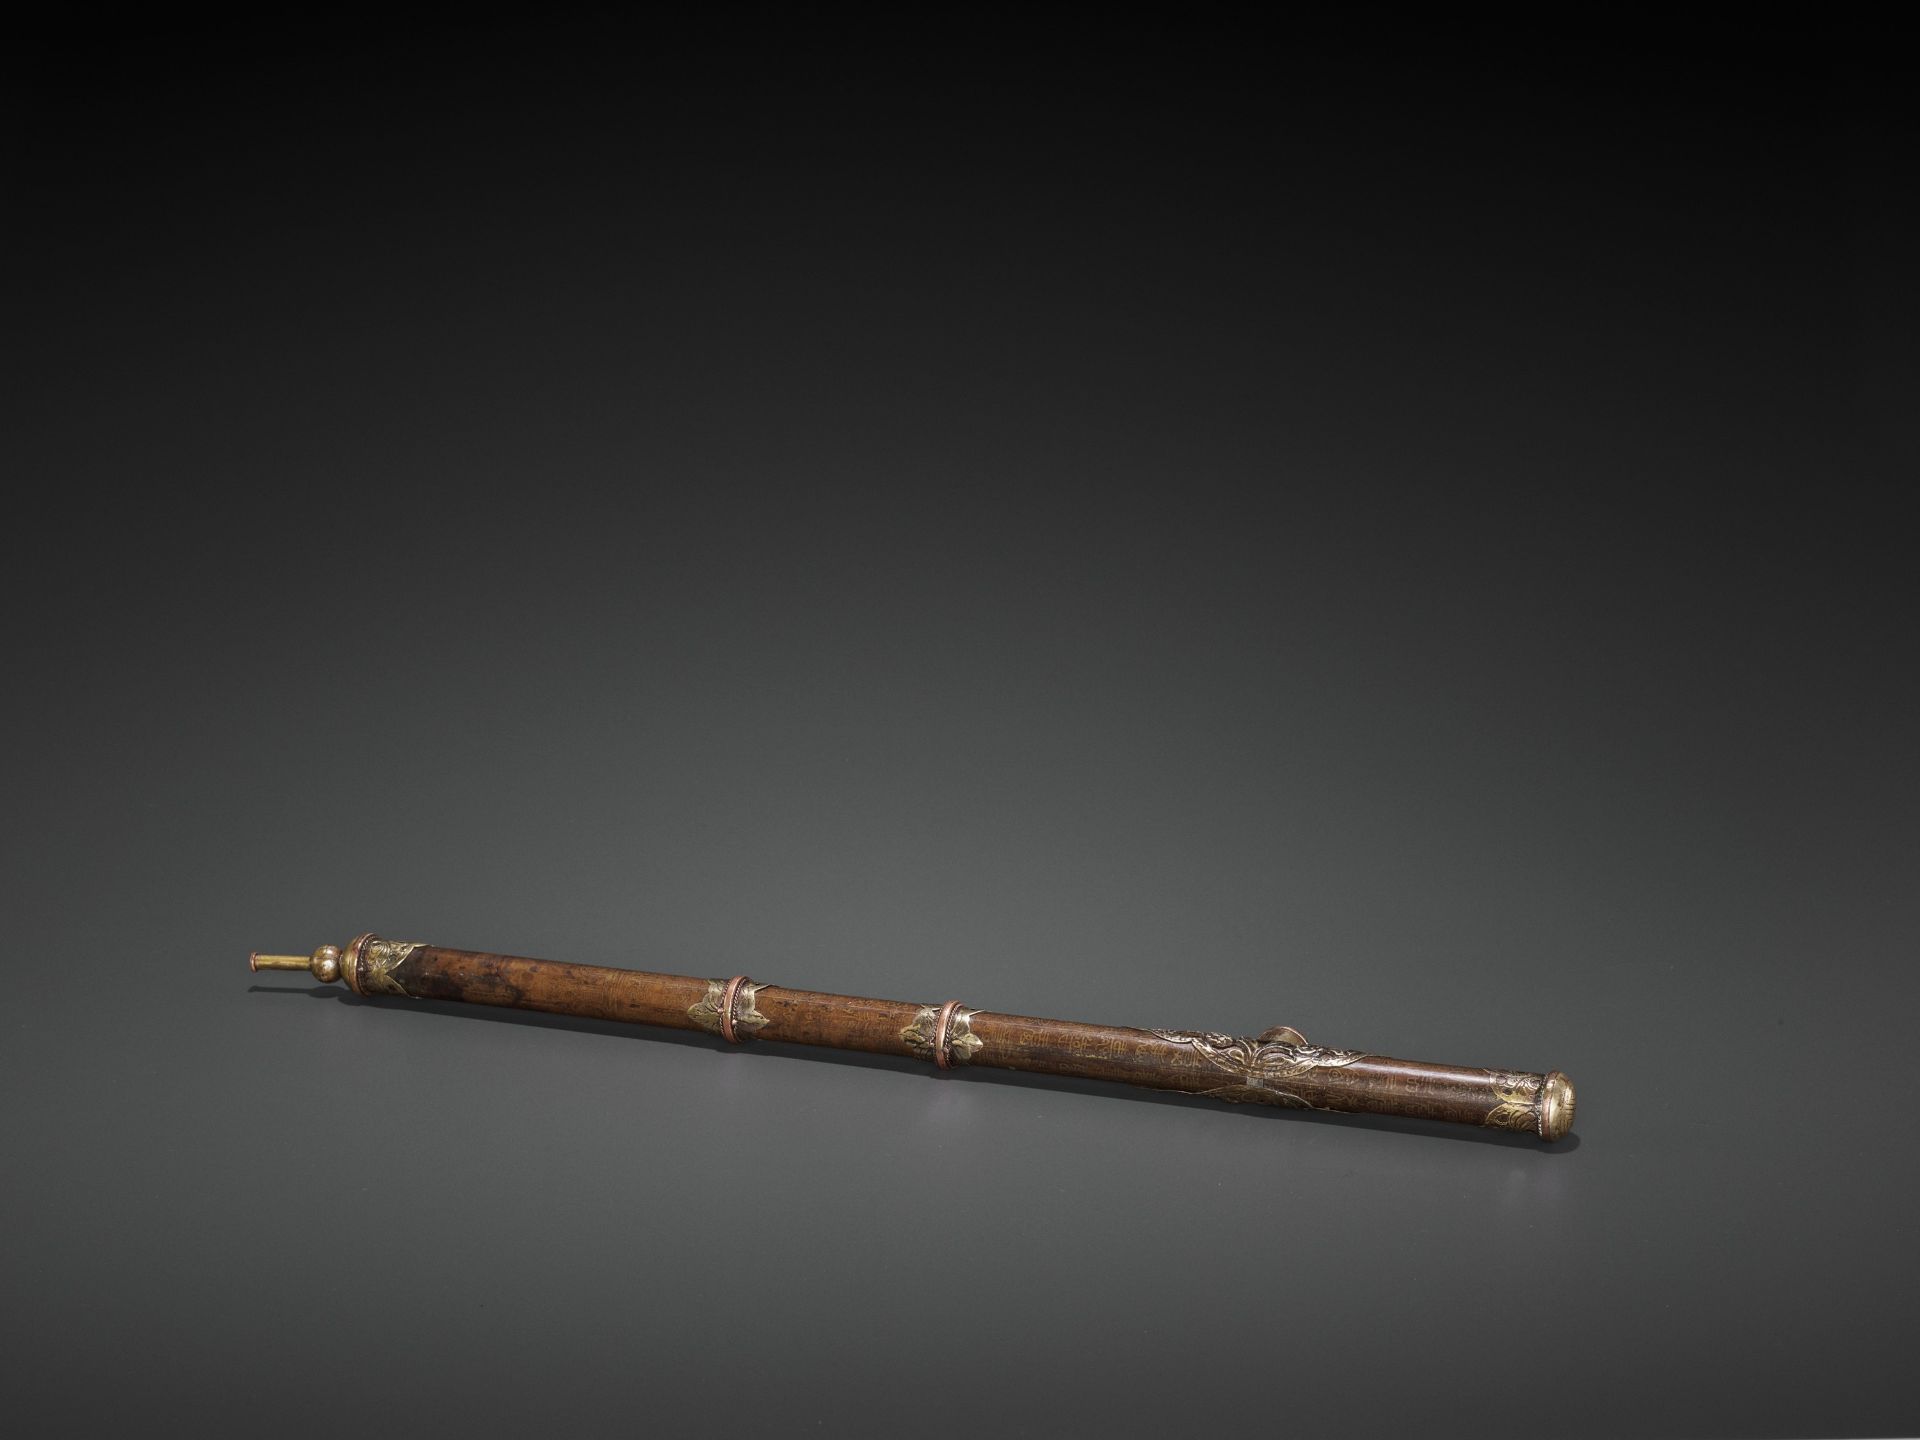 AN INSCRIBED BRONZE OPIUM PIPE WITH SILVER AND COPPER FITTINGS, LATE QING TO REPUBLIC - Image 8 of 8